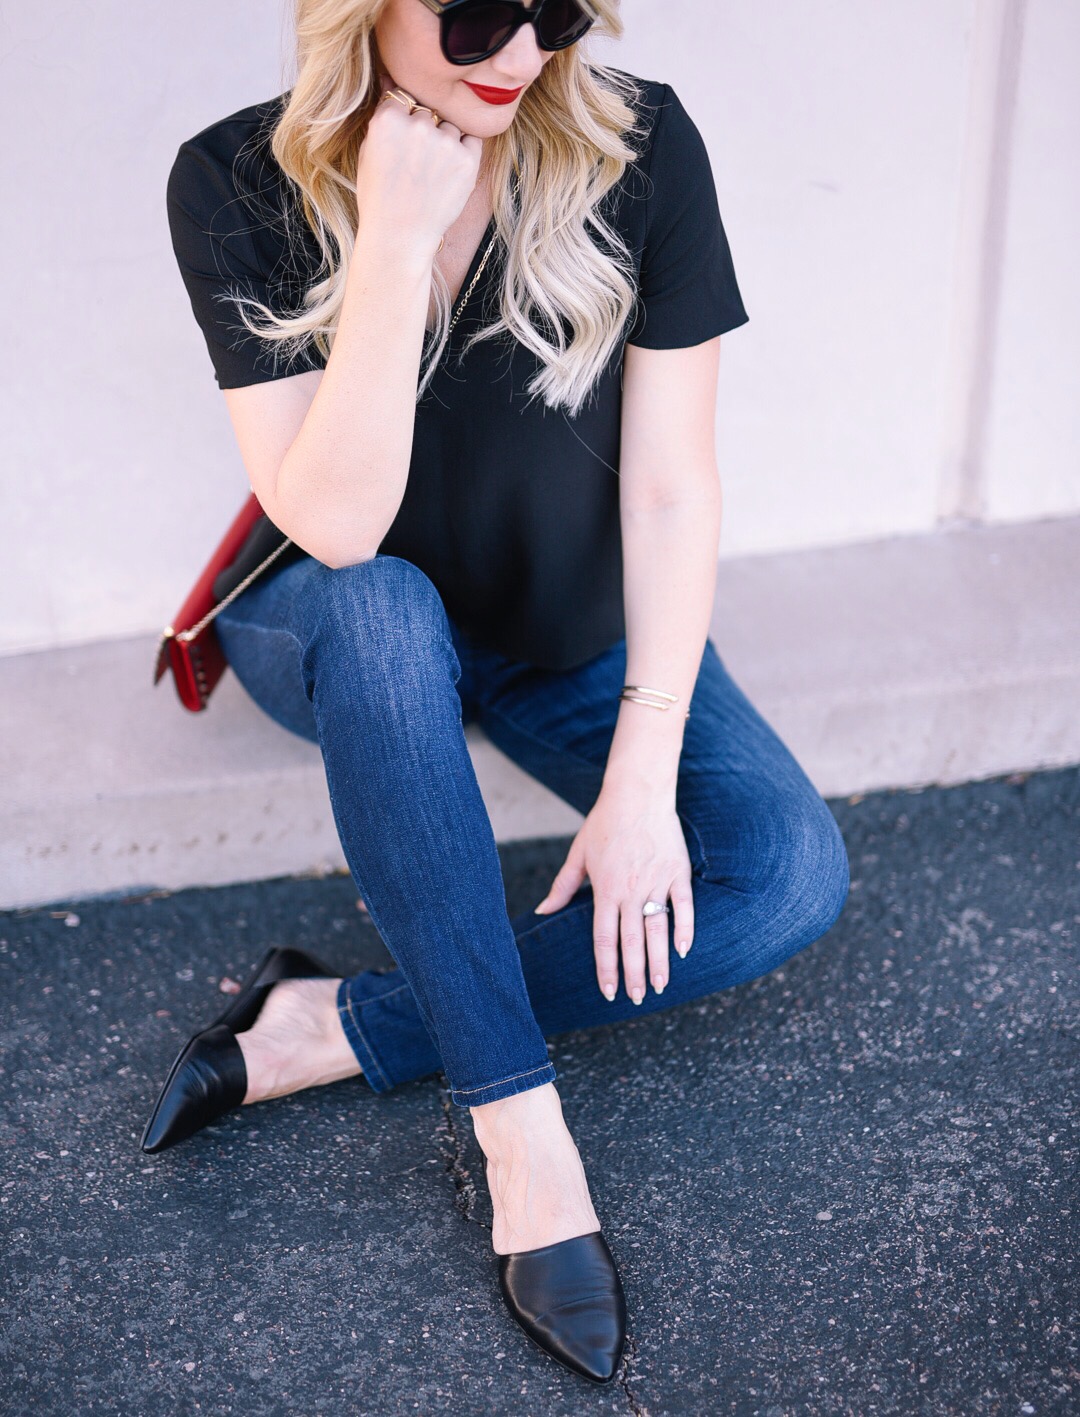 Black V-Neck tee and dark wash skinny jeans on Jenna Colgrove of Visions of Vogue. 